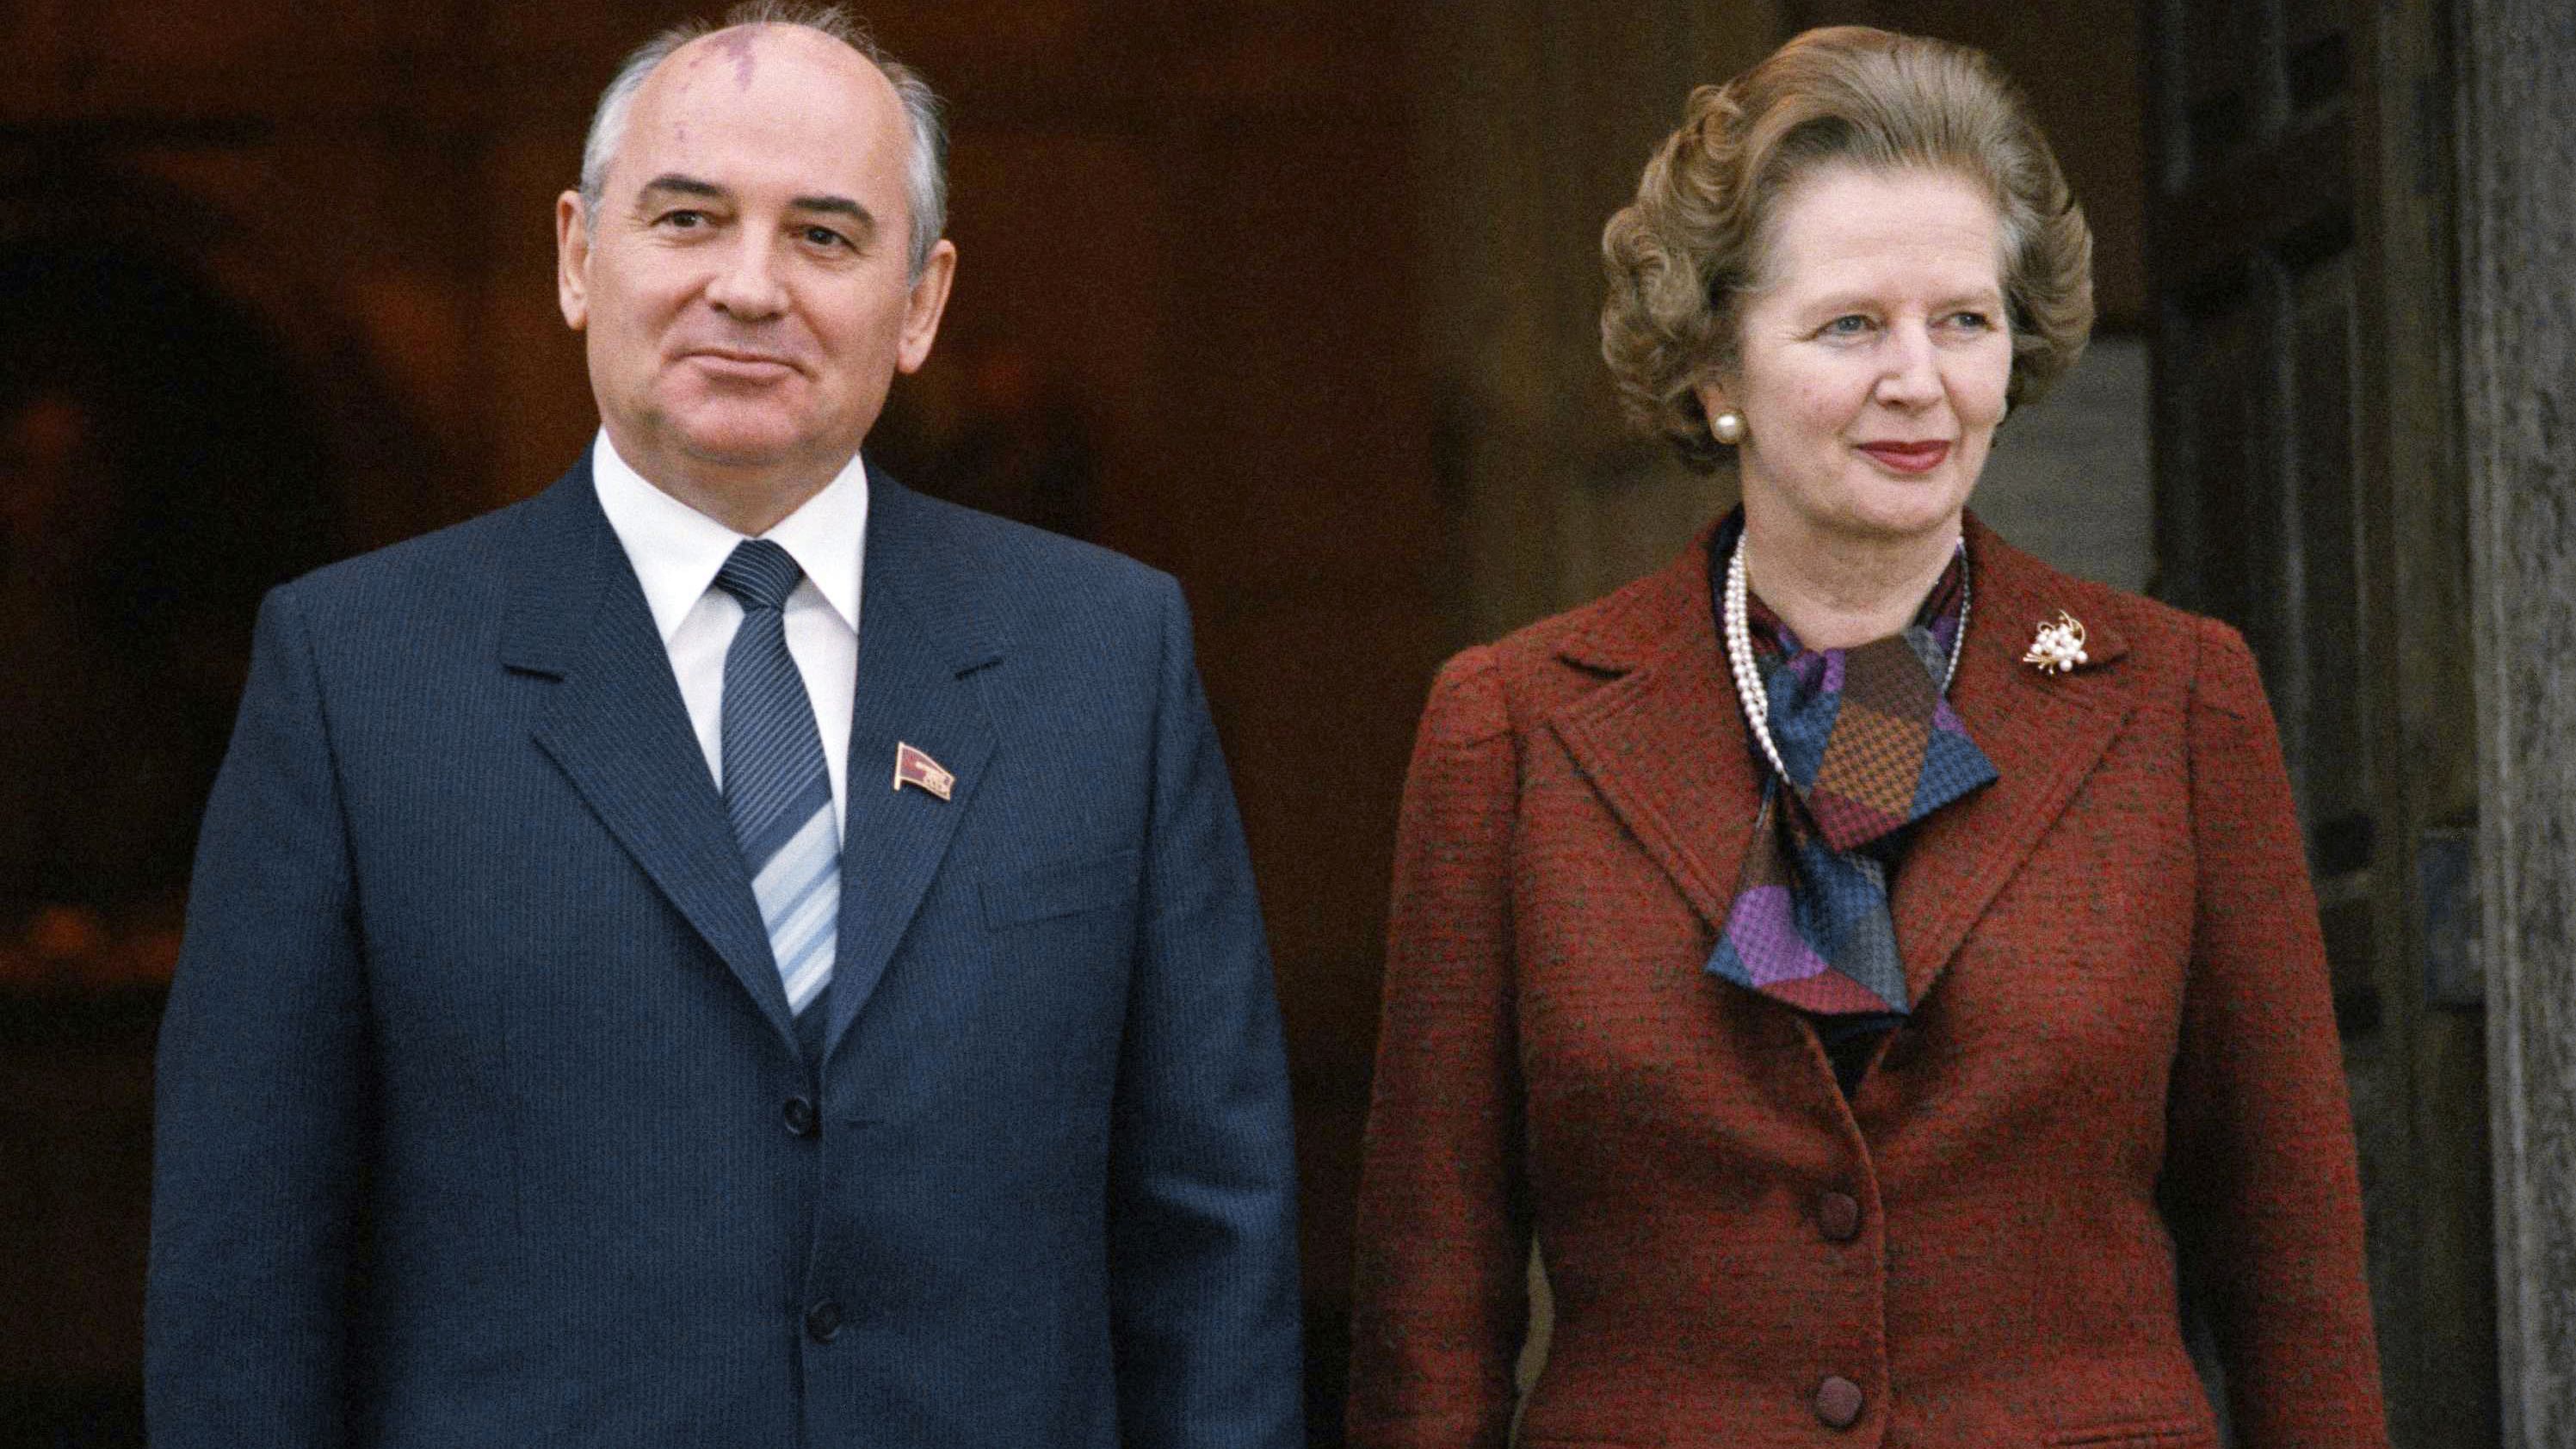 Gorbachev and British Prime Minister Margaret Thatcher pose for a picture in London as they meet in December 1984. Thatcher once called him "a man one can do business with."